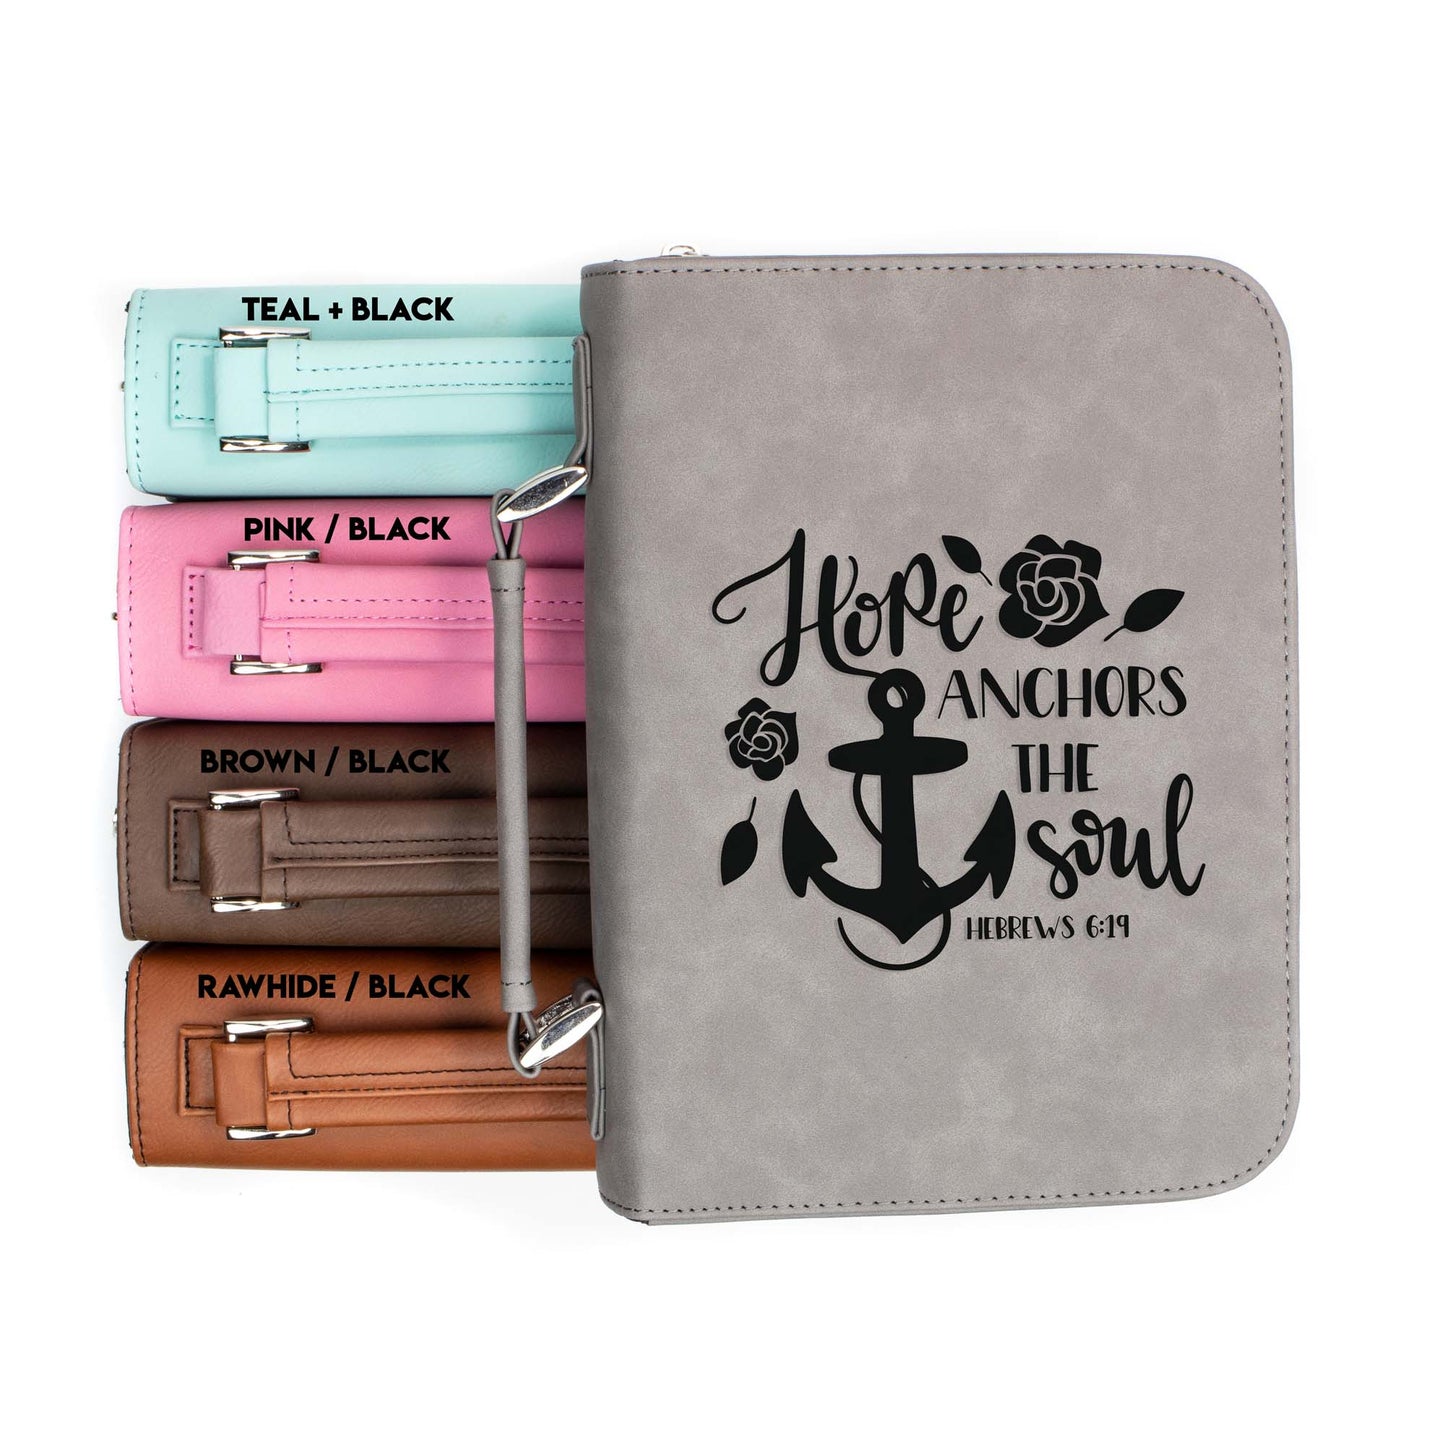 Hope Anchors the Soul Hebrews 6-19 Bible Cover | Faux Leather With Handle + Pockets